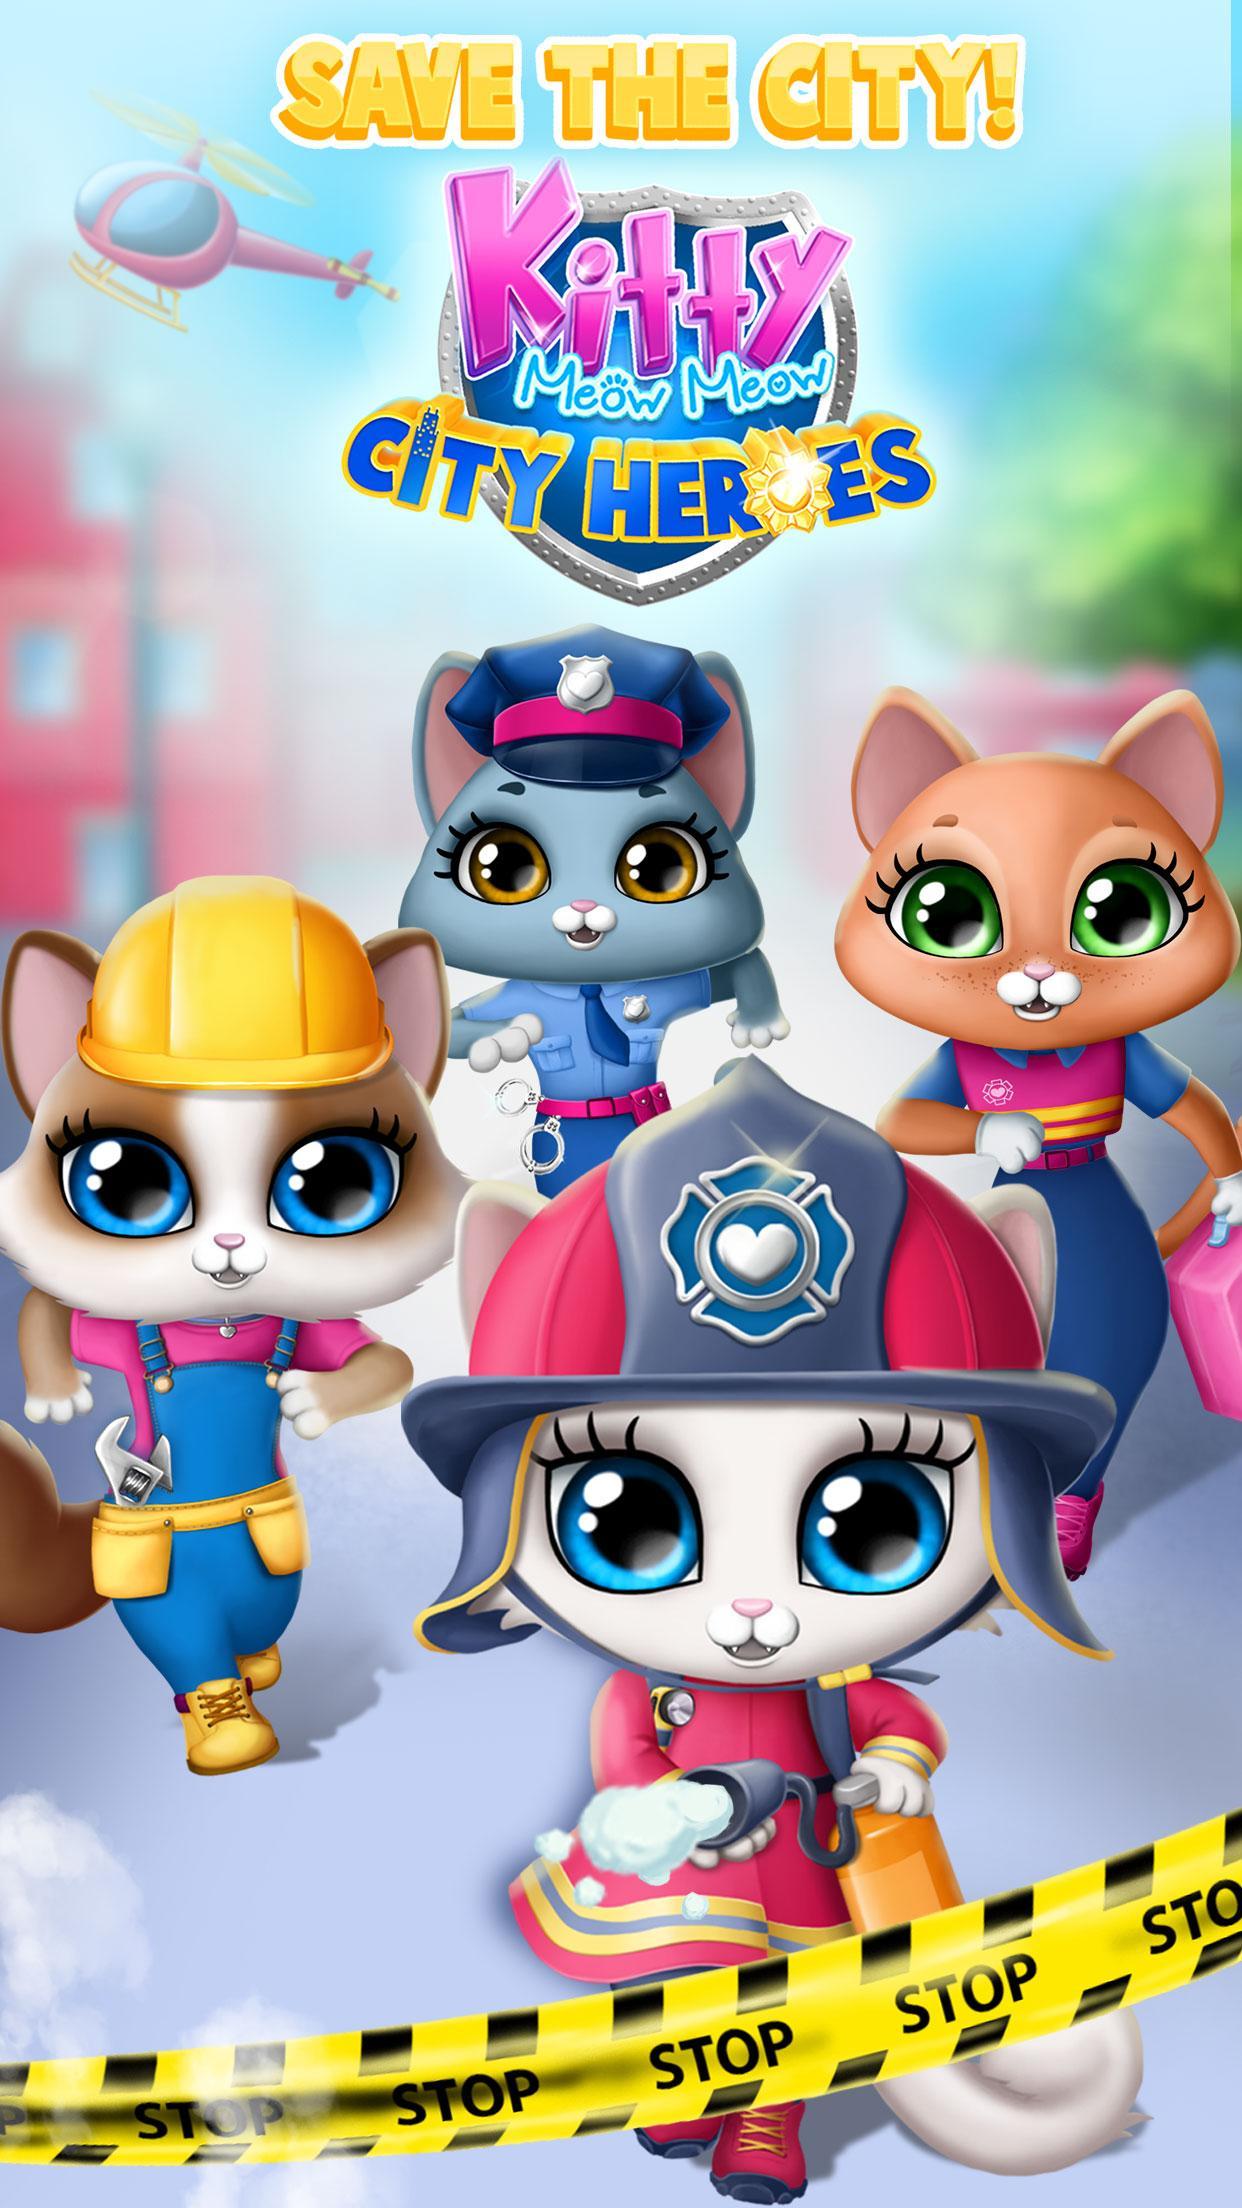 Kitty Meow Meow City Heroes Cats to the Rescue 2.0.56 Screenshot 1